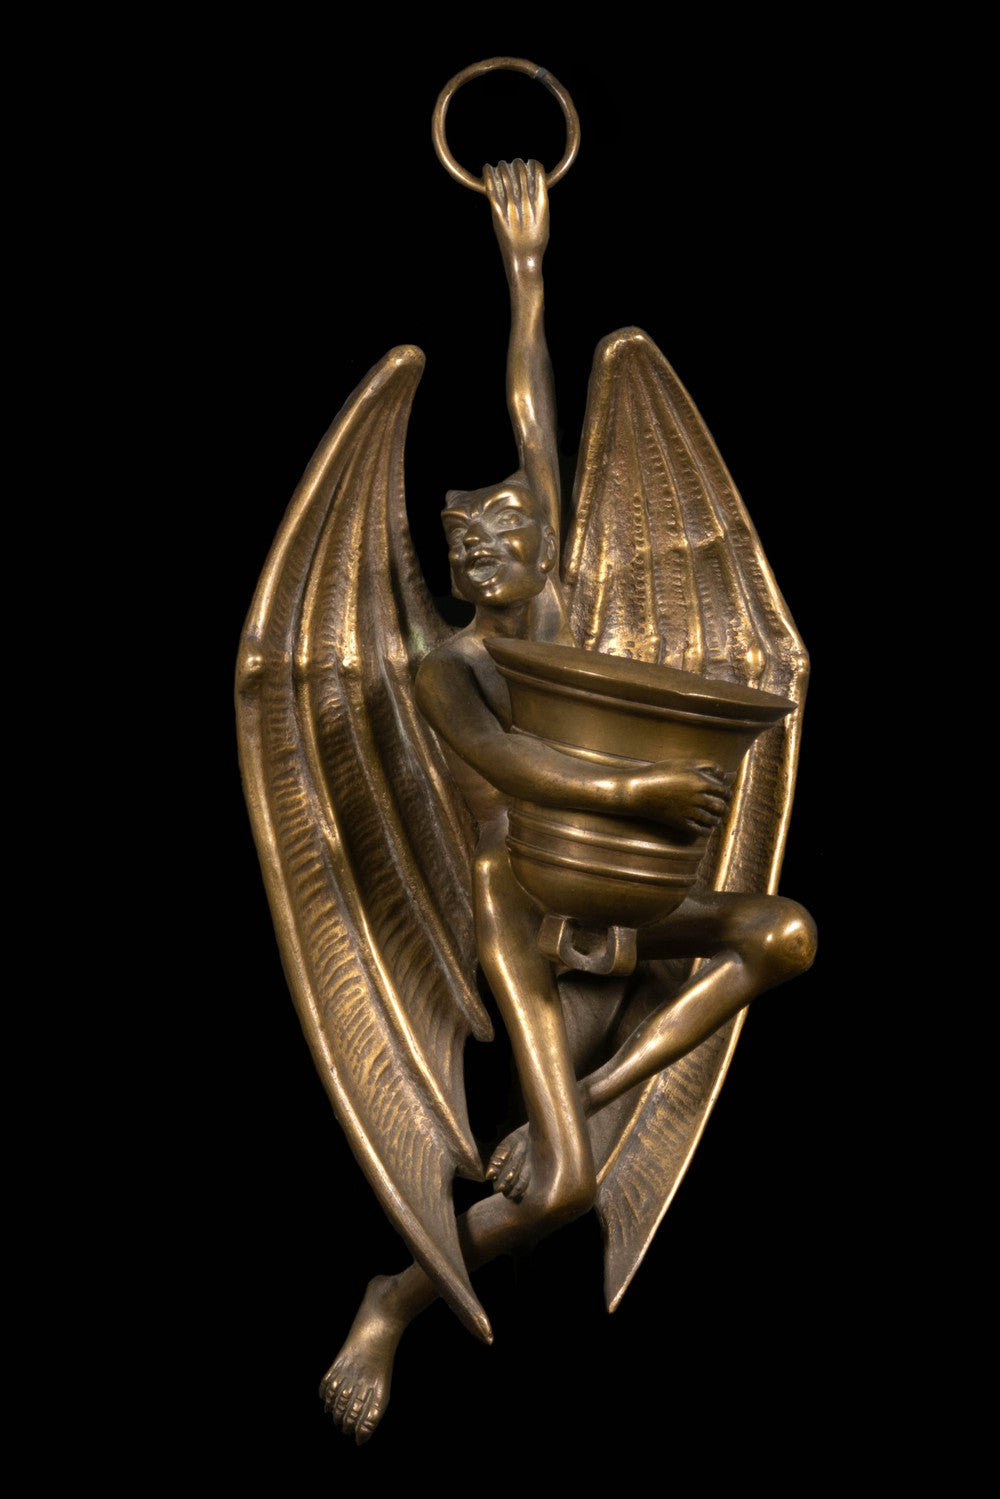 BRONZE THE DEVIL FLIES WITH THE CHURCH BELL - RELICS